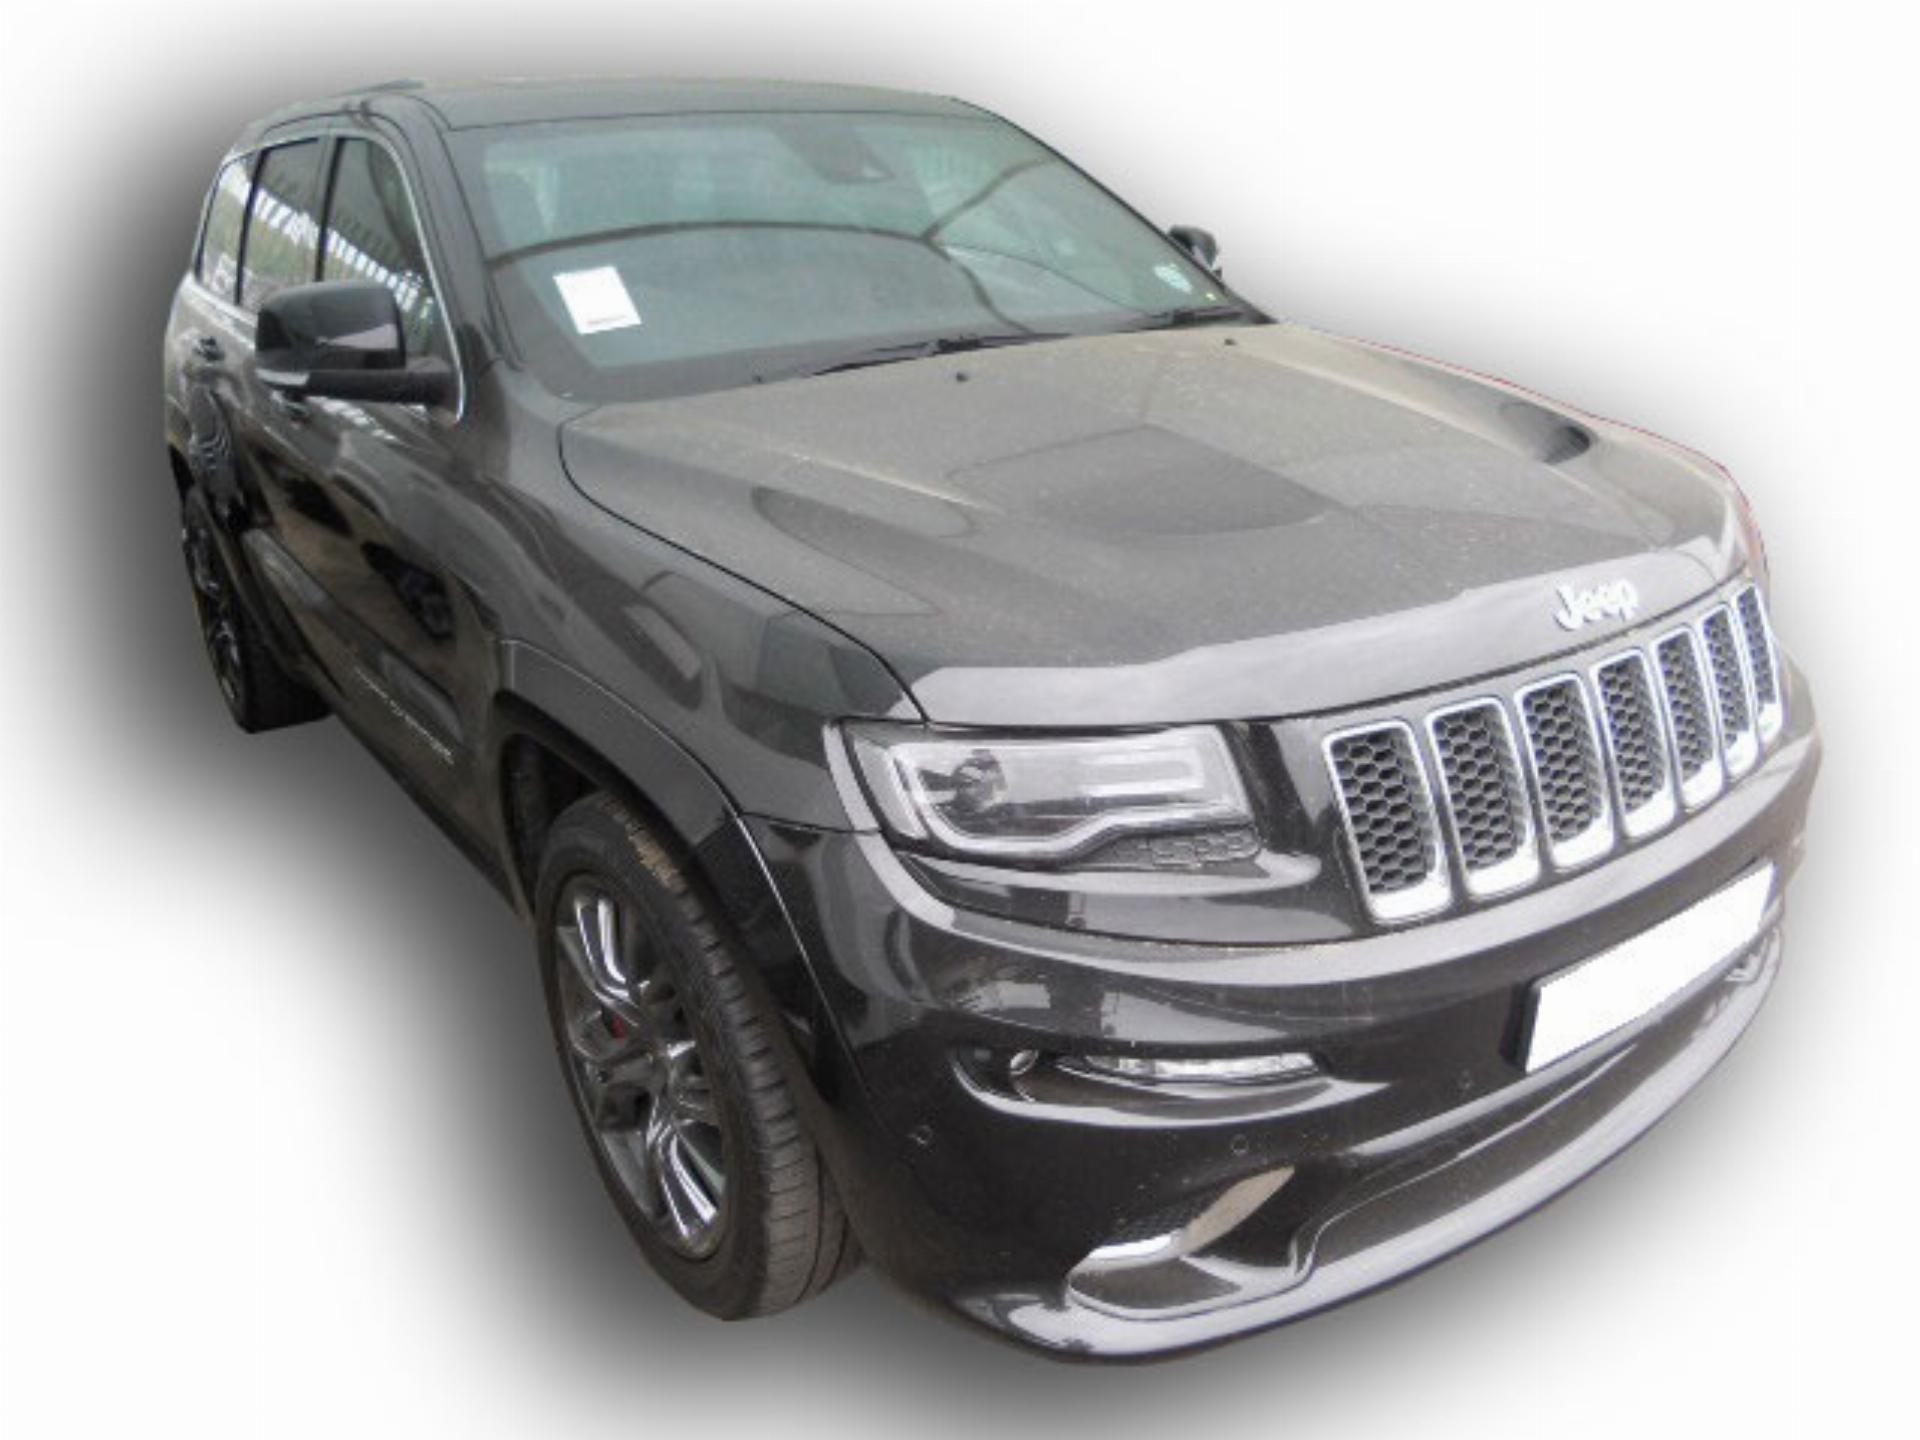 Repossessed Jeep Grand Cherokee 6.4 S R T 2015 on auction